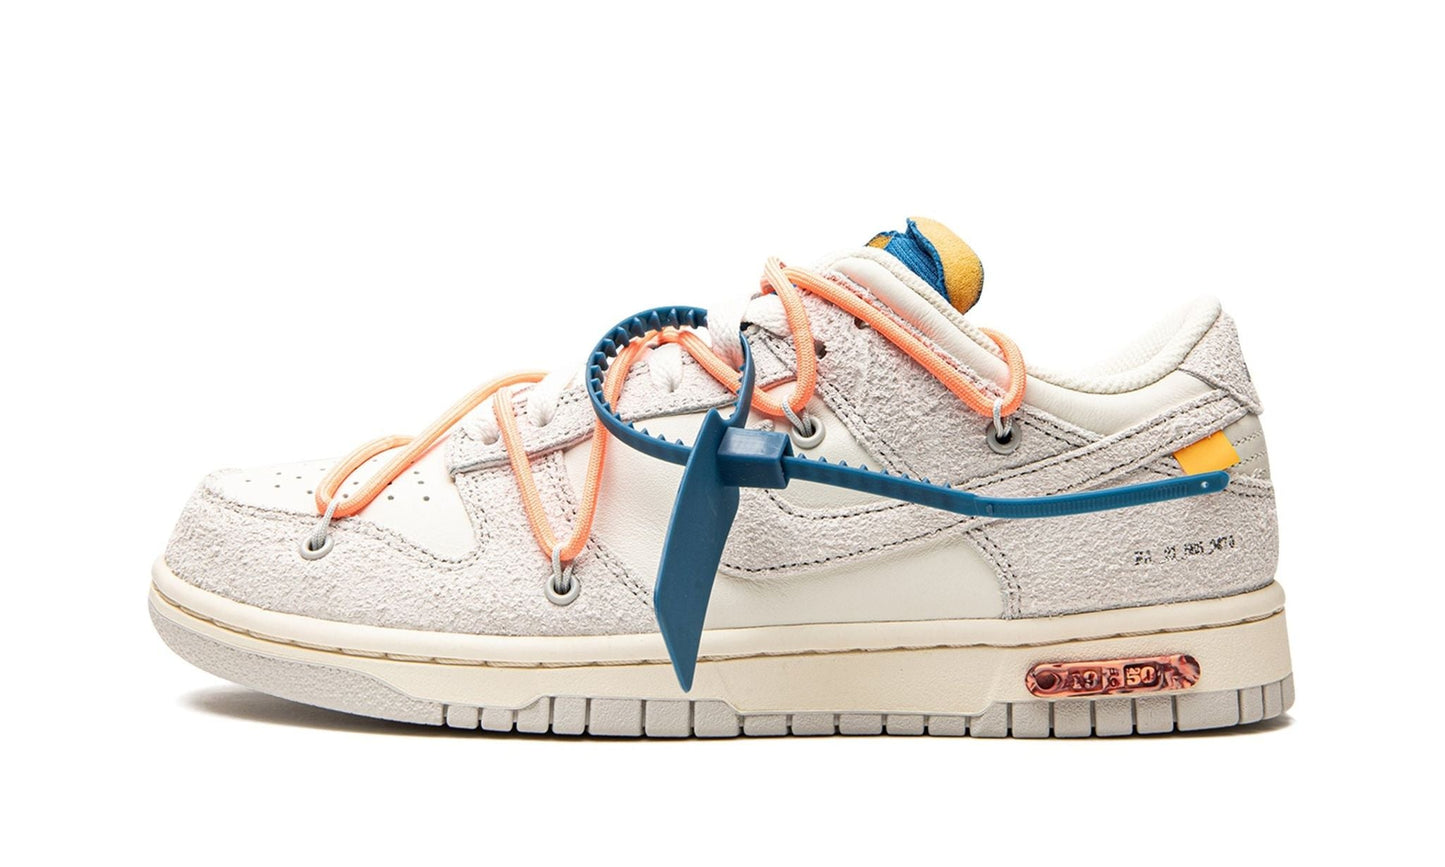 NIKE X OFF-WHITE DUNK LOW "Off-White - Lot 19"